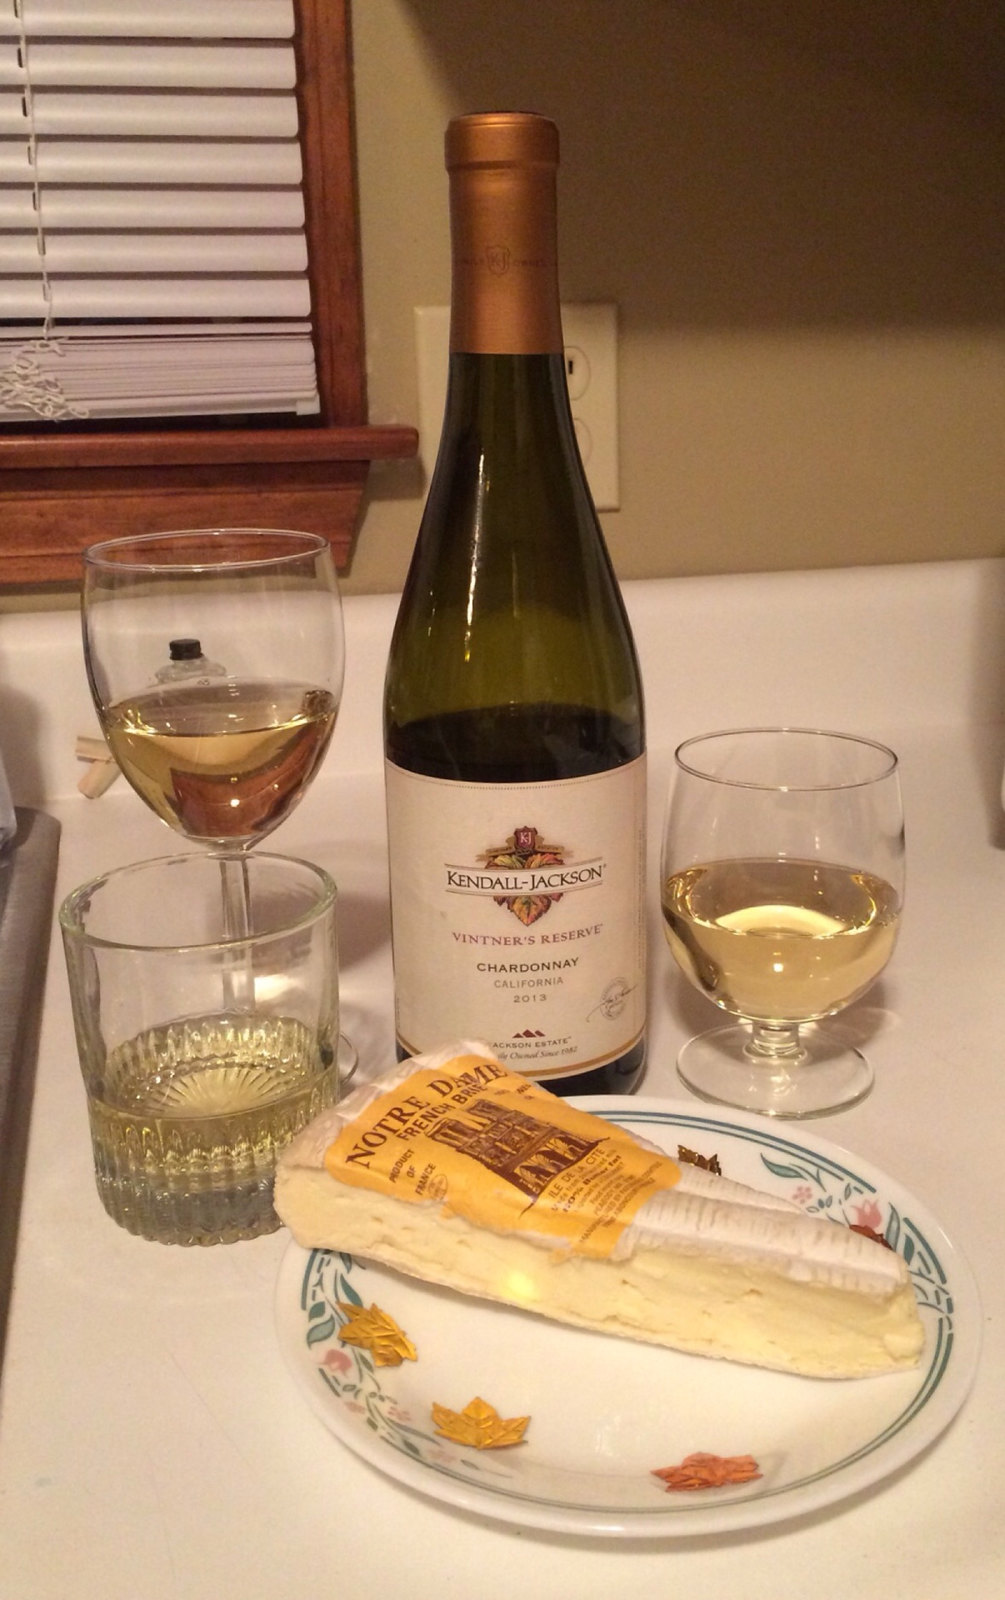 Kendall Jackson Chardonnay and Notre Dame French Brie 1